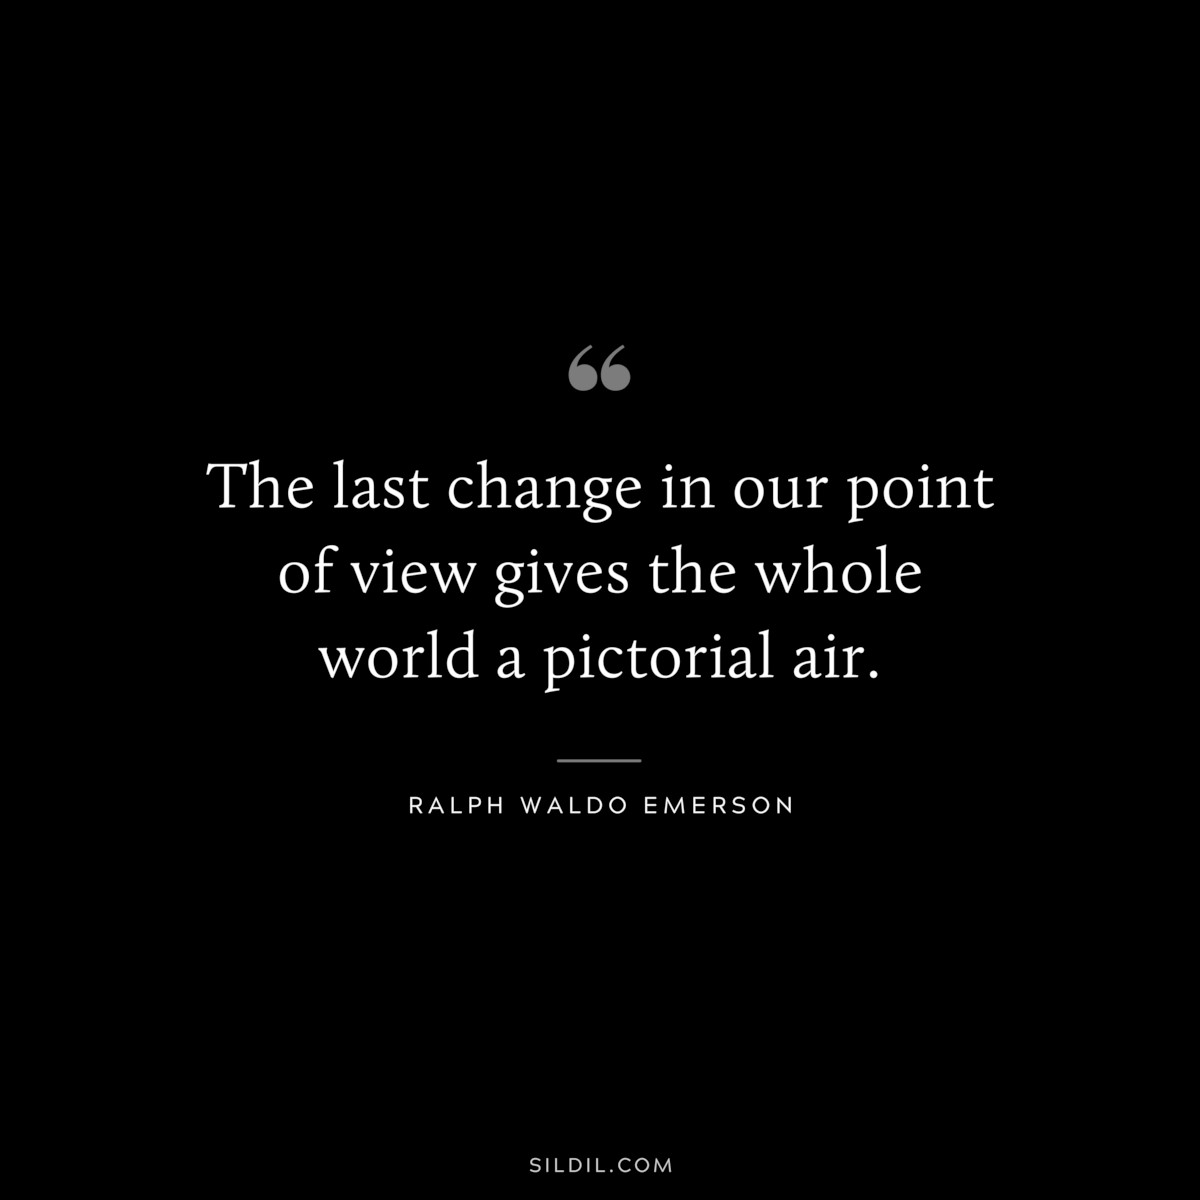 The last change in our point of view gives the whole world a pictorial air. — Ralph Waldo Emerson